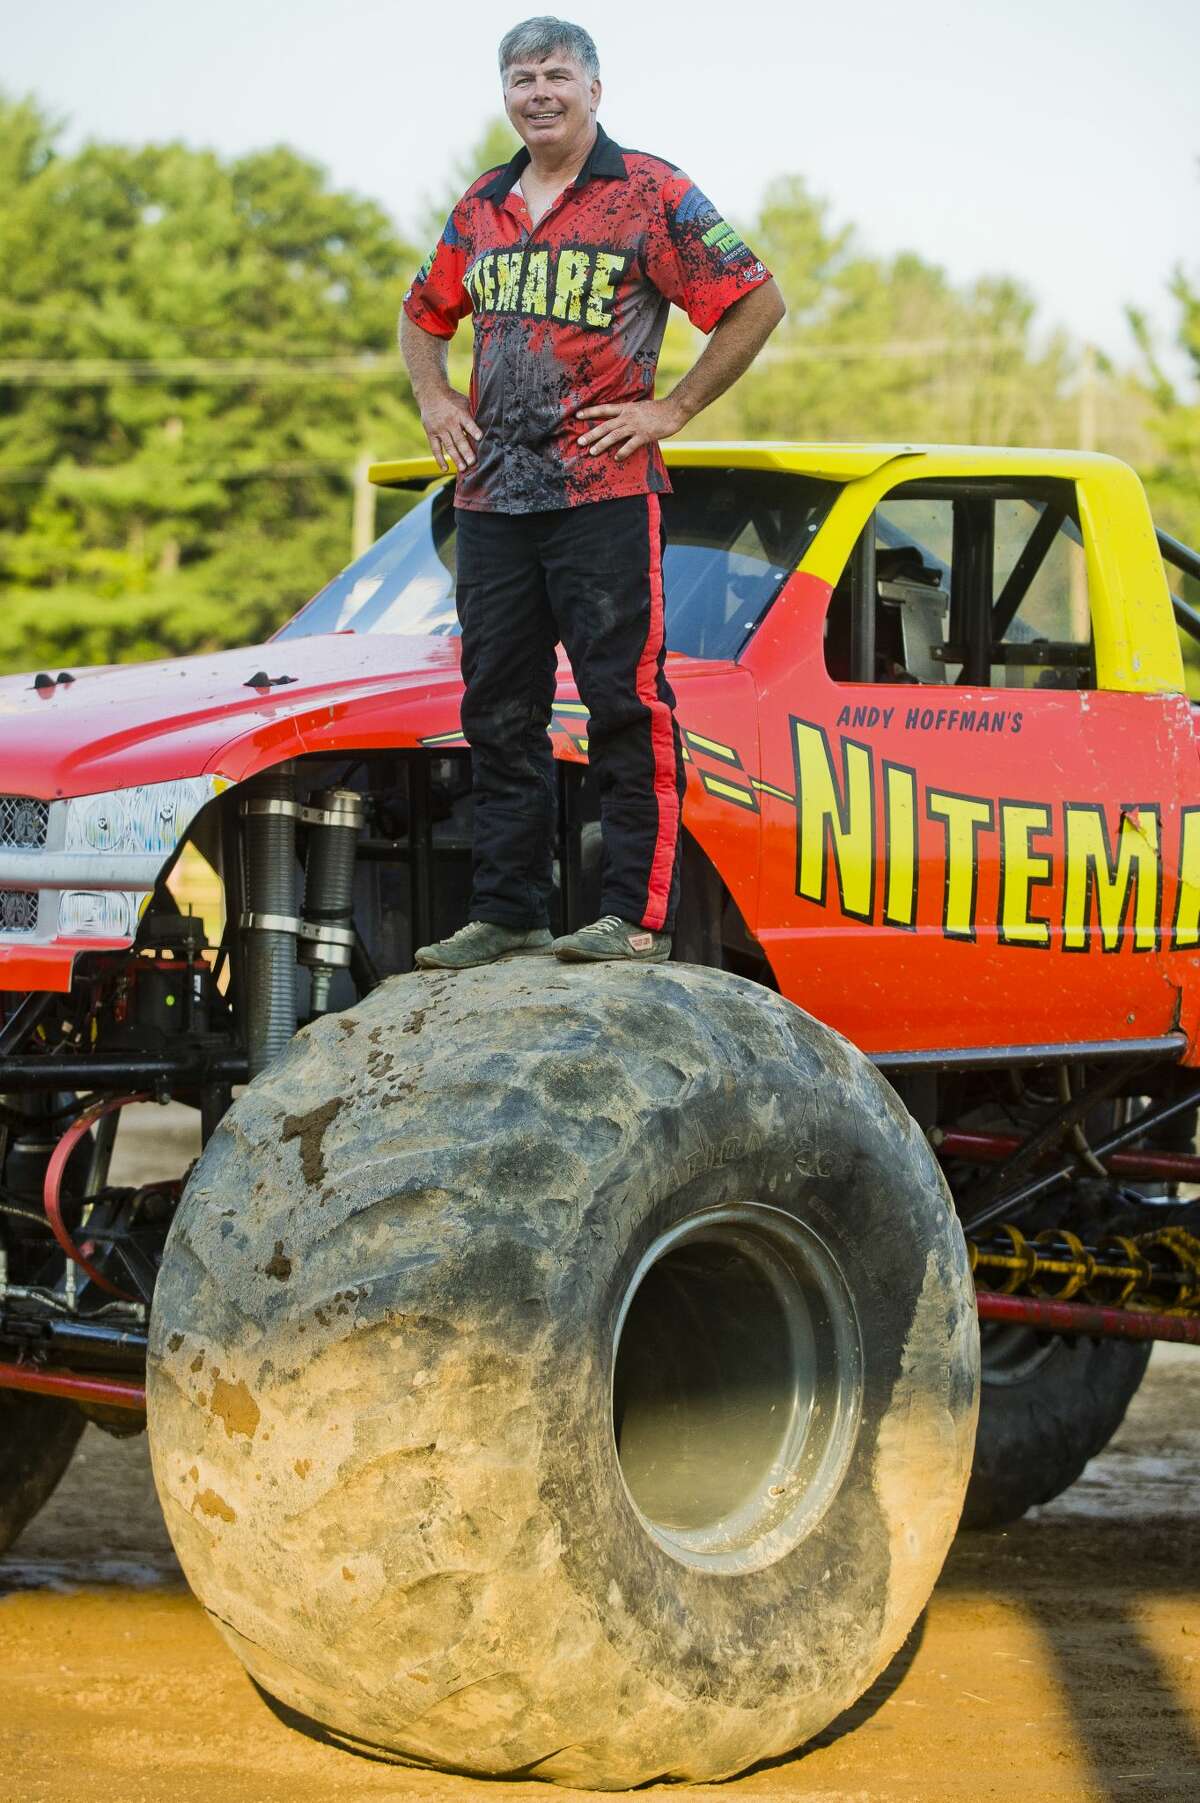 Andy Hoffman of Indiana stands on top of a tire on his monster truck, called Nitemare, before participating in a monster truck rally on Wednesday, August 16, 2017 at the Midland County Fairgrounds.